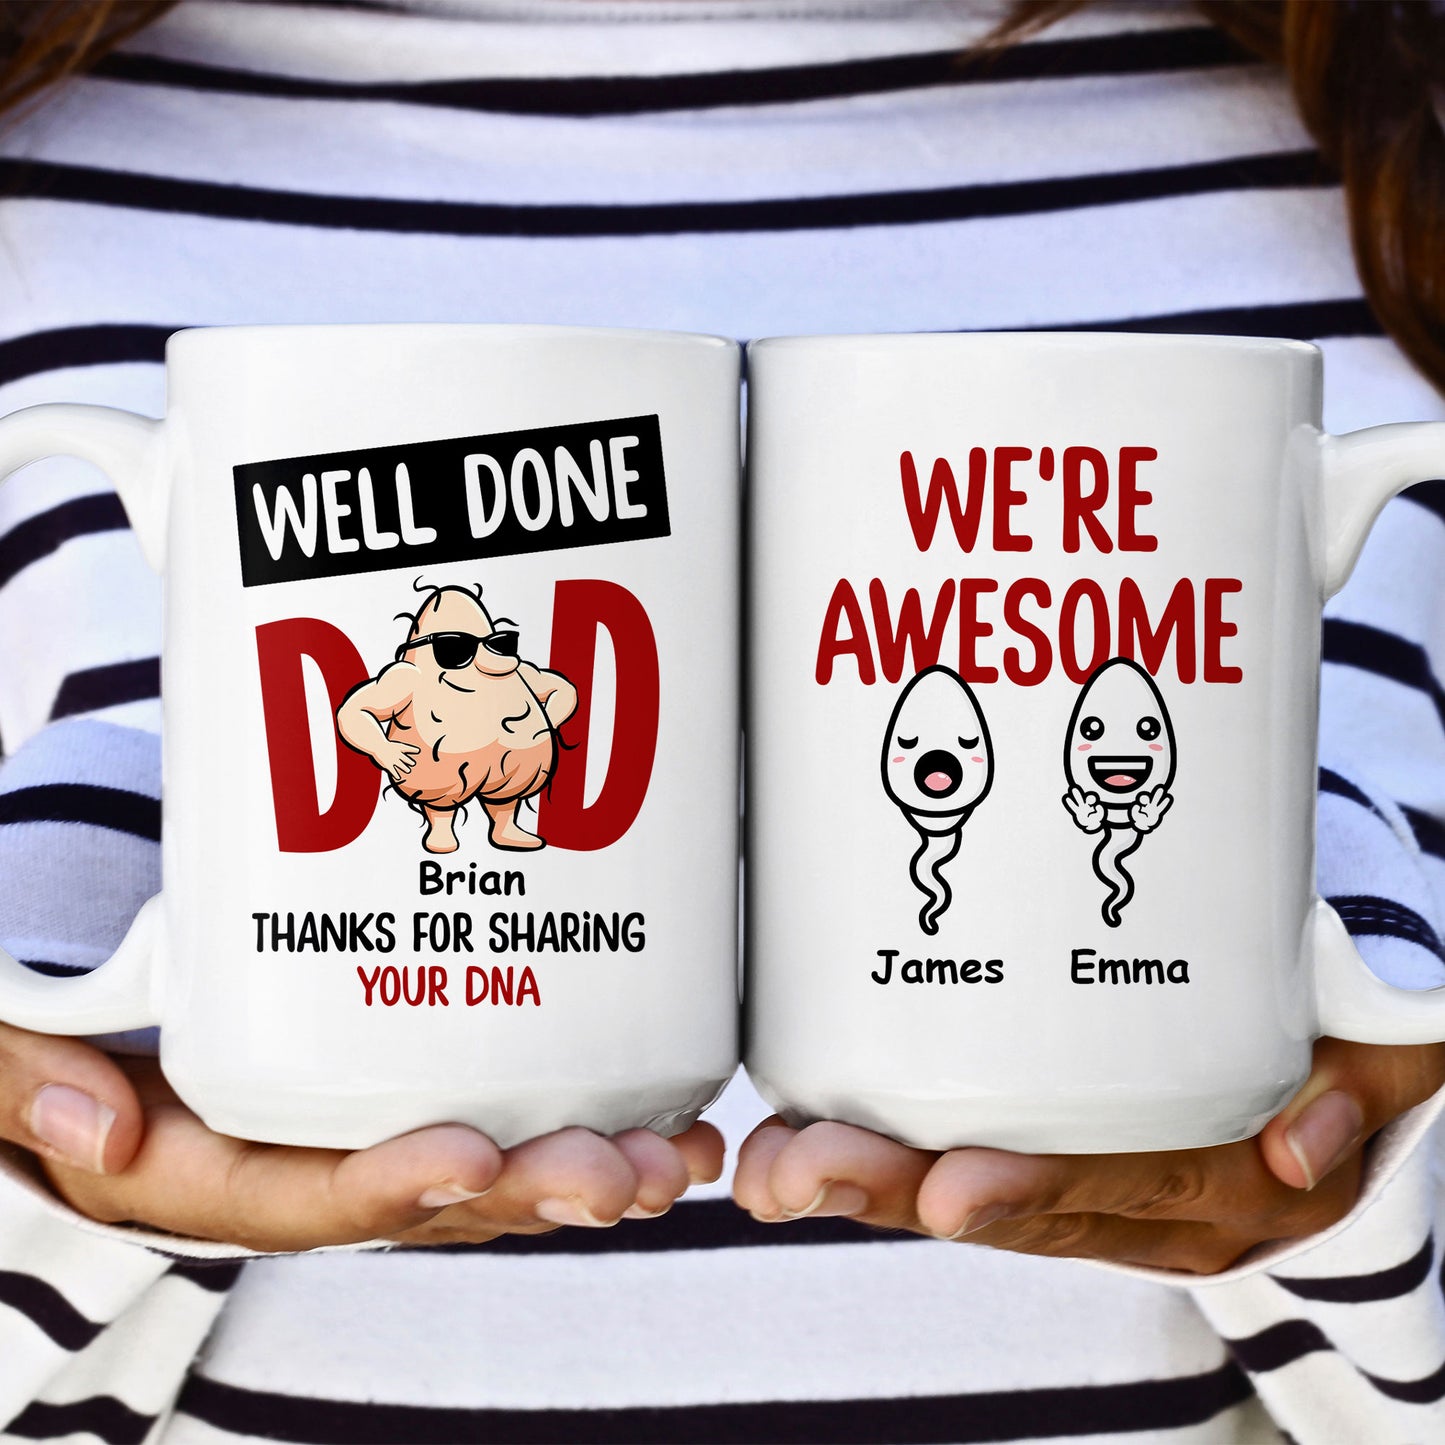 Thanks For Sharing Your DNA - Personalized Mug